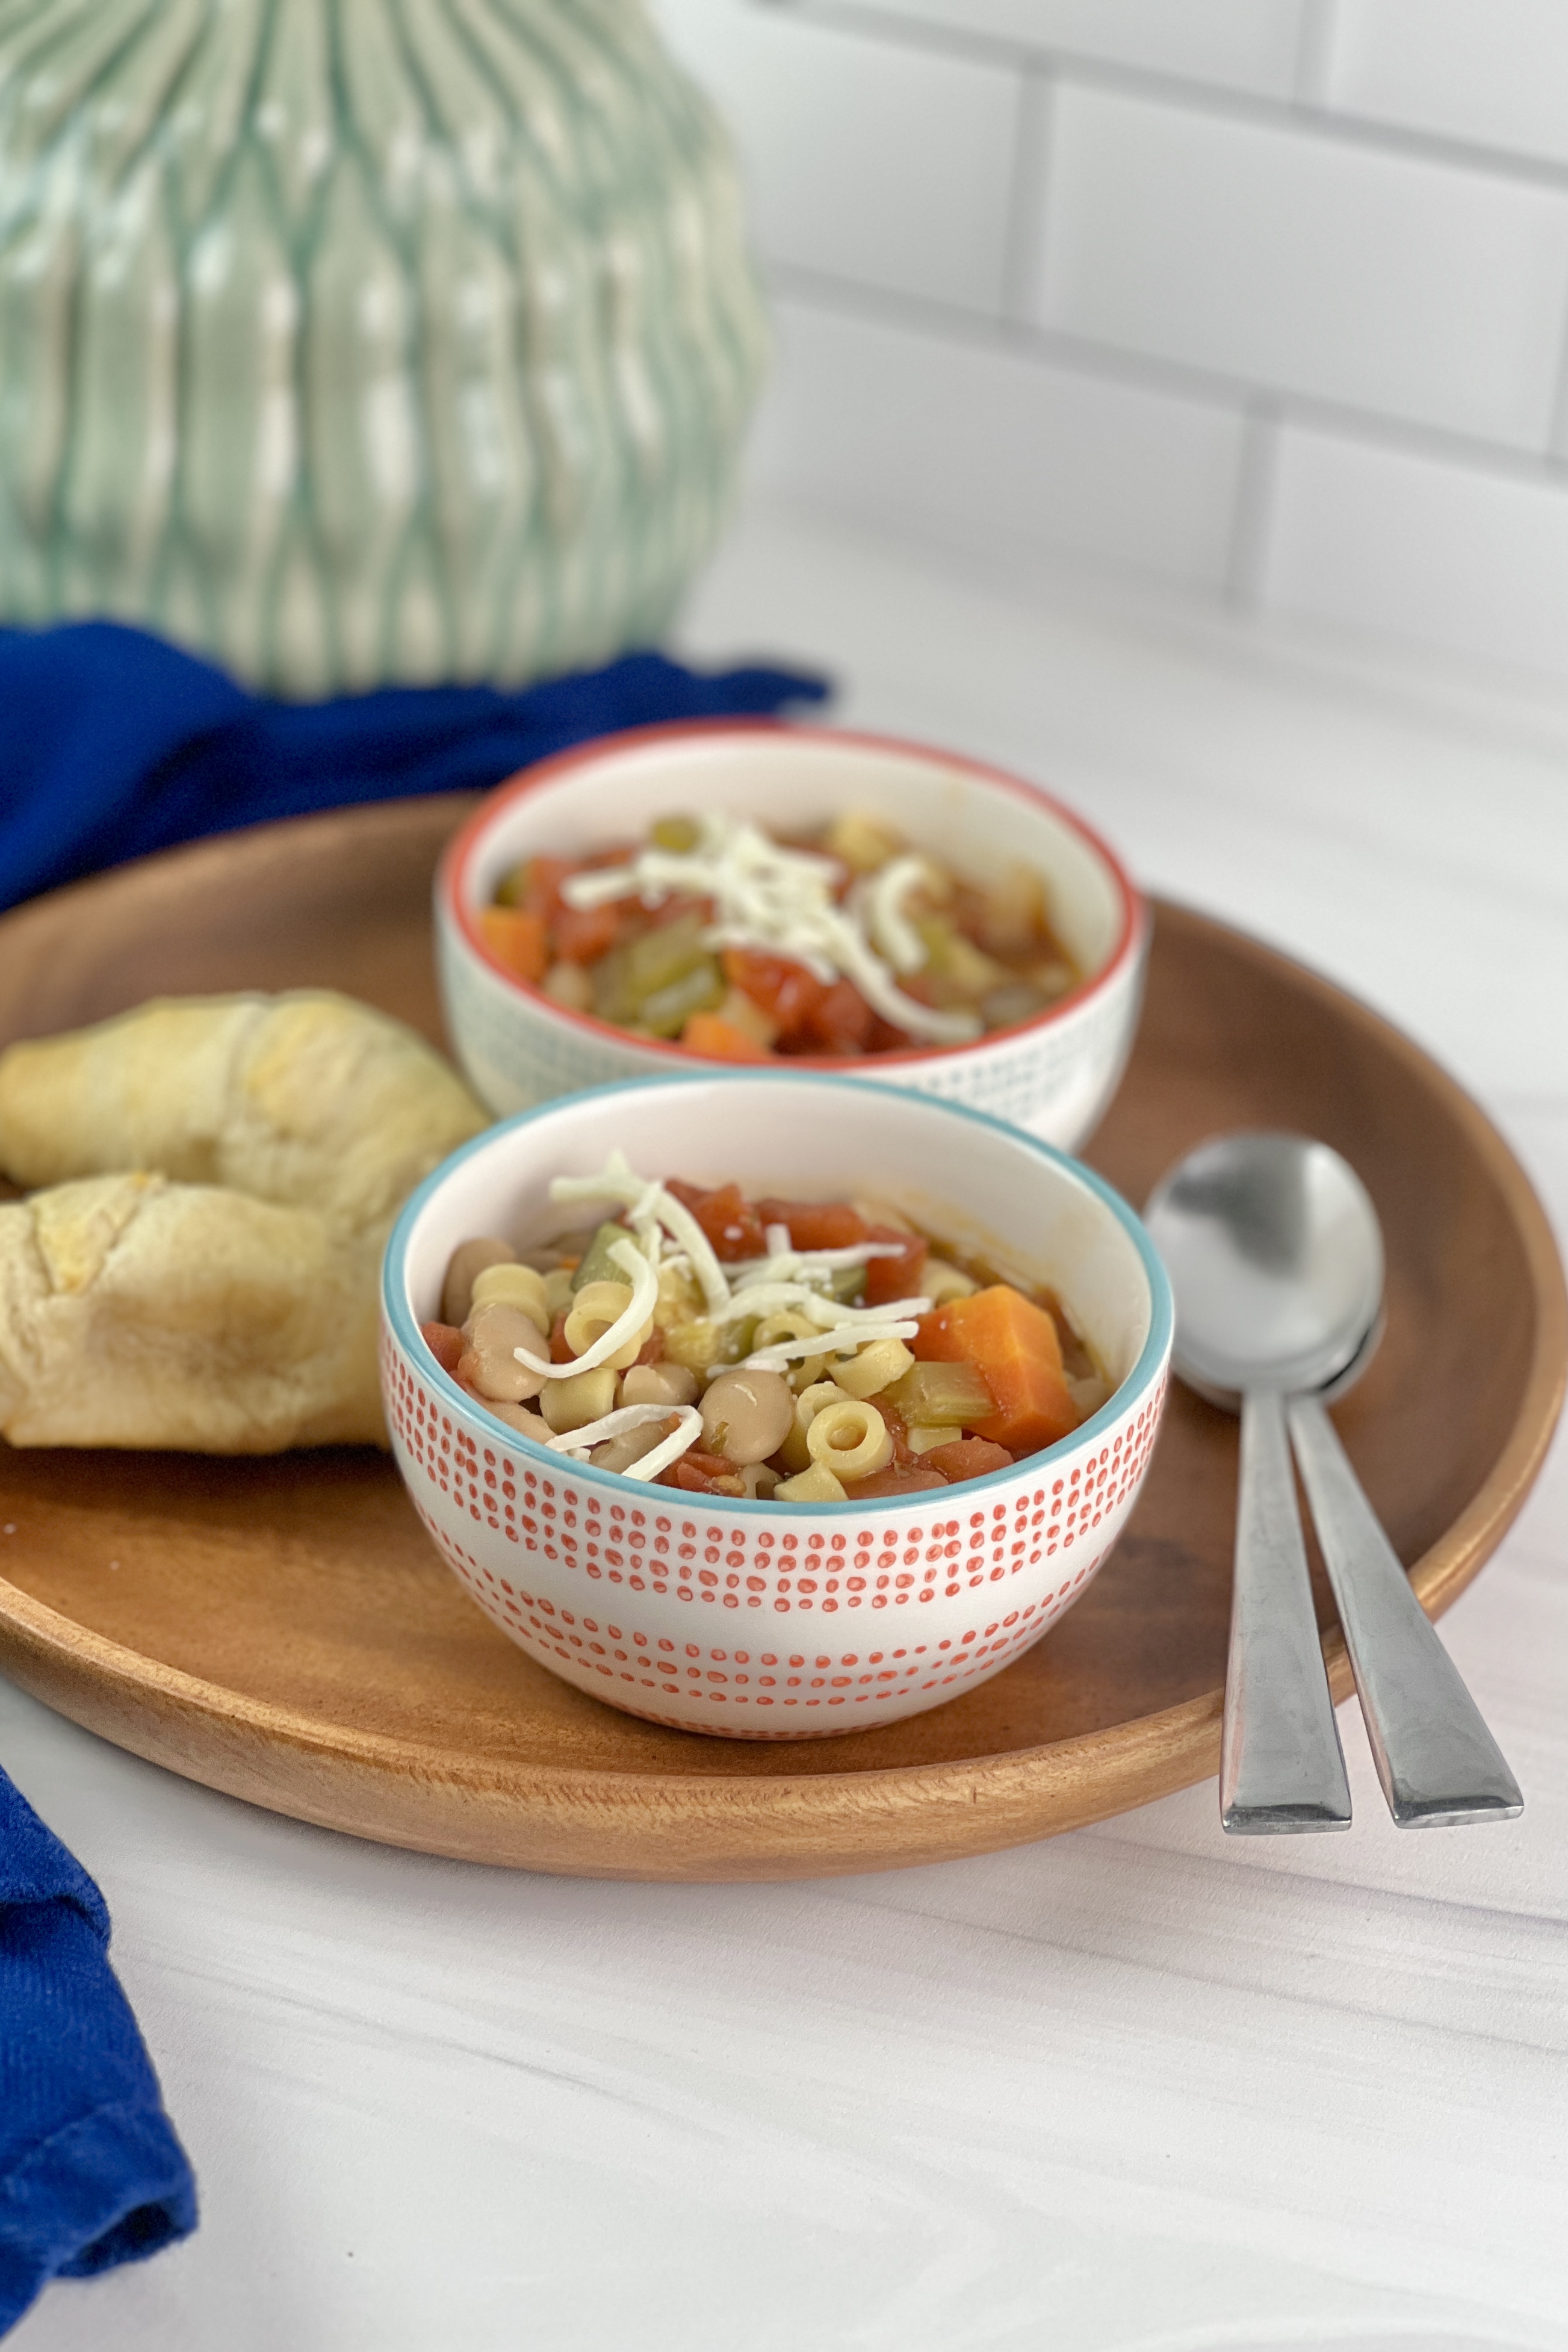 This Instant Pot Minestrone Soup makes a delicious dinner that is filled with vegetables and plant-based protein. It can also be made vegan and/or gluten-free.